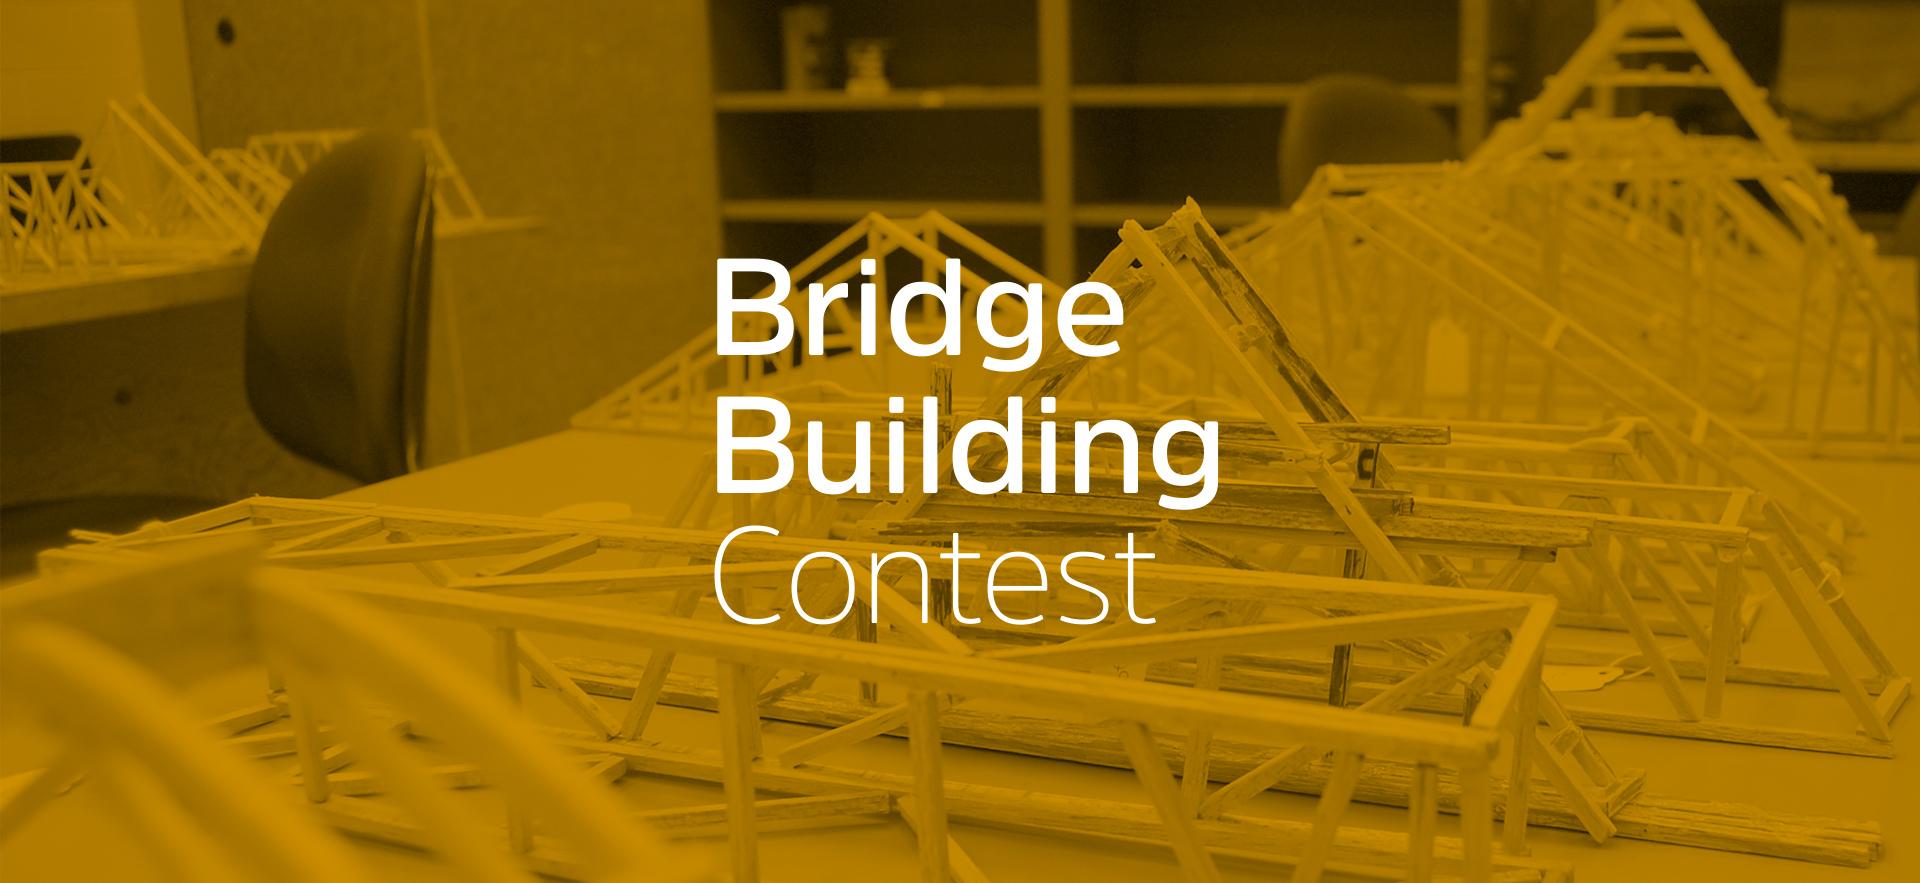 Photo showing built bridges on a table with a yellow tone overtop the image with Bridge Building Contest text in centre